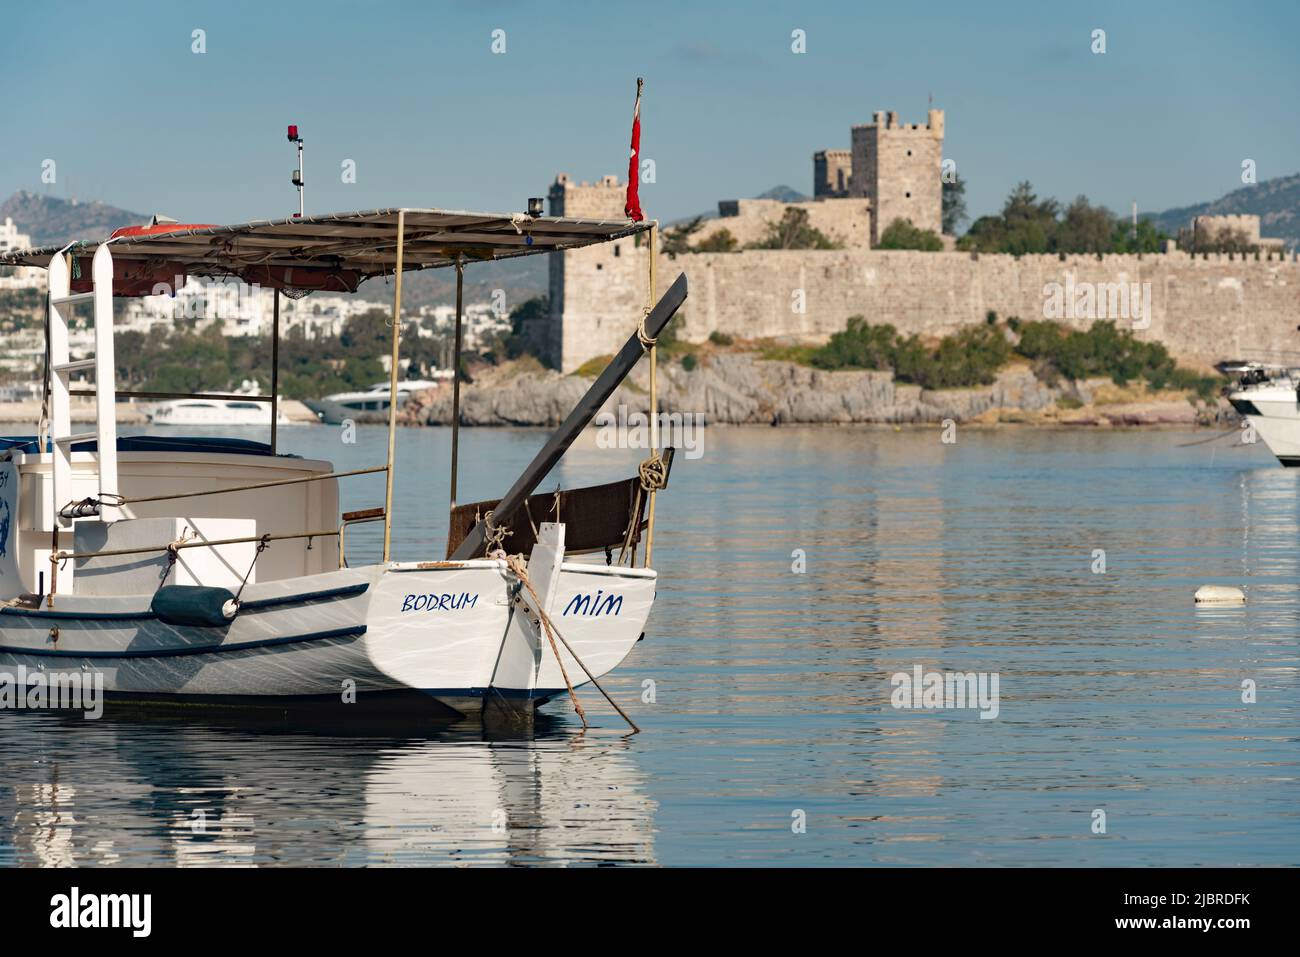 Bodrum, Mugla, Turkey. April 21st 2022 A fishing boat named Bodrum in Bodrum harbour, a popular Turkish tourist resort with a medieval fortress and a Stock Photo